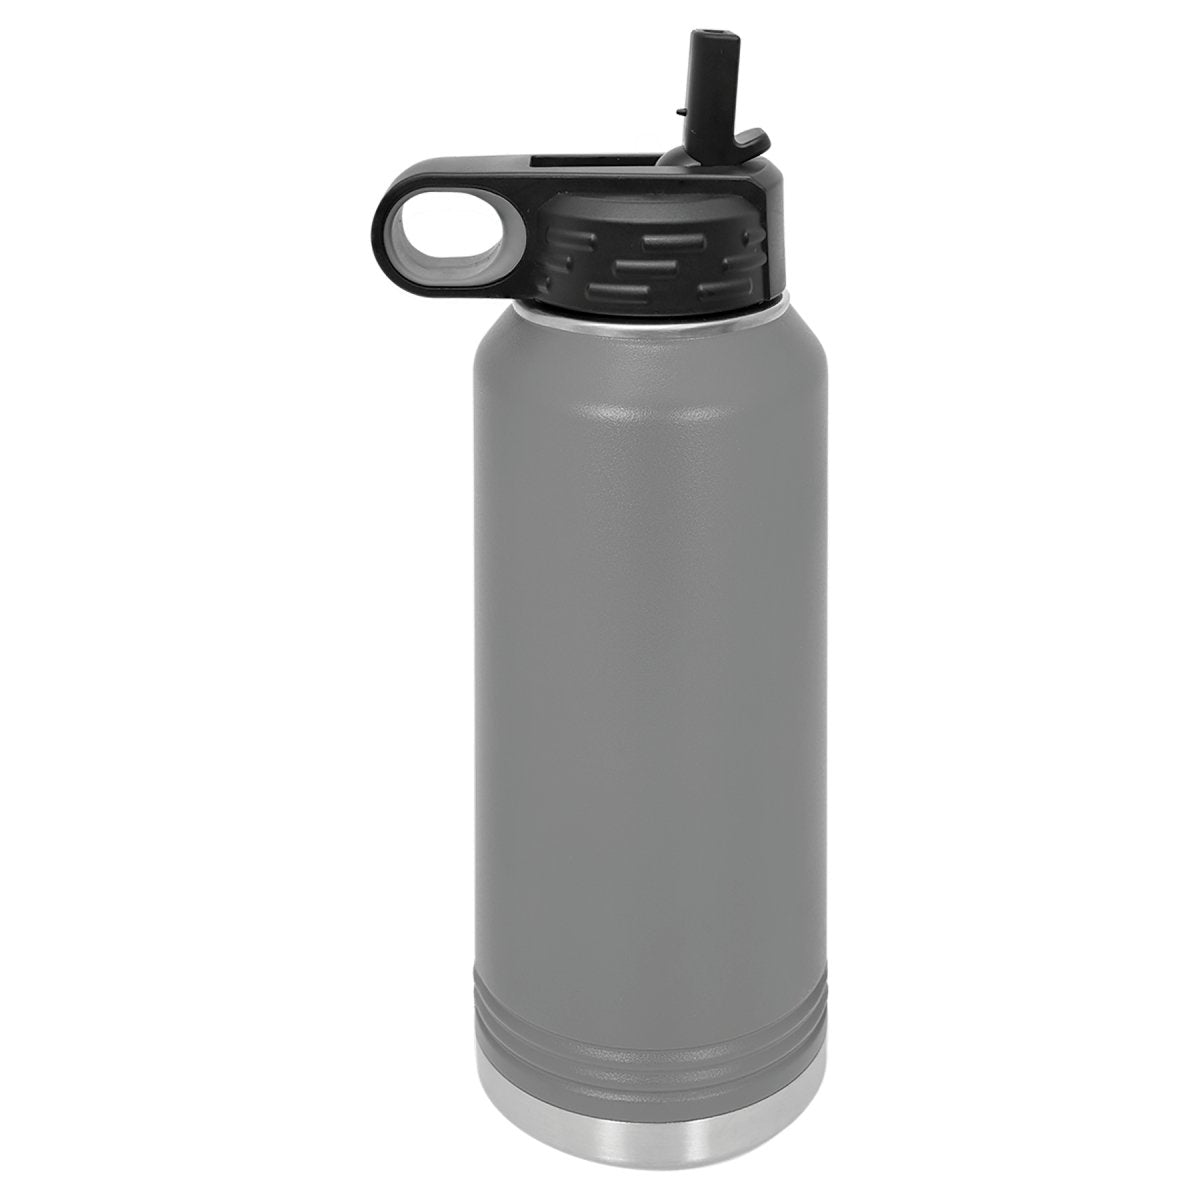 Old Bridge Knights 32oz Stainless Steel & Powder Coated Sport Tumbler - The Luua Company